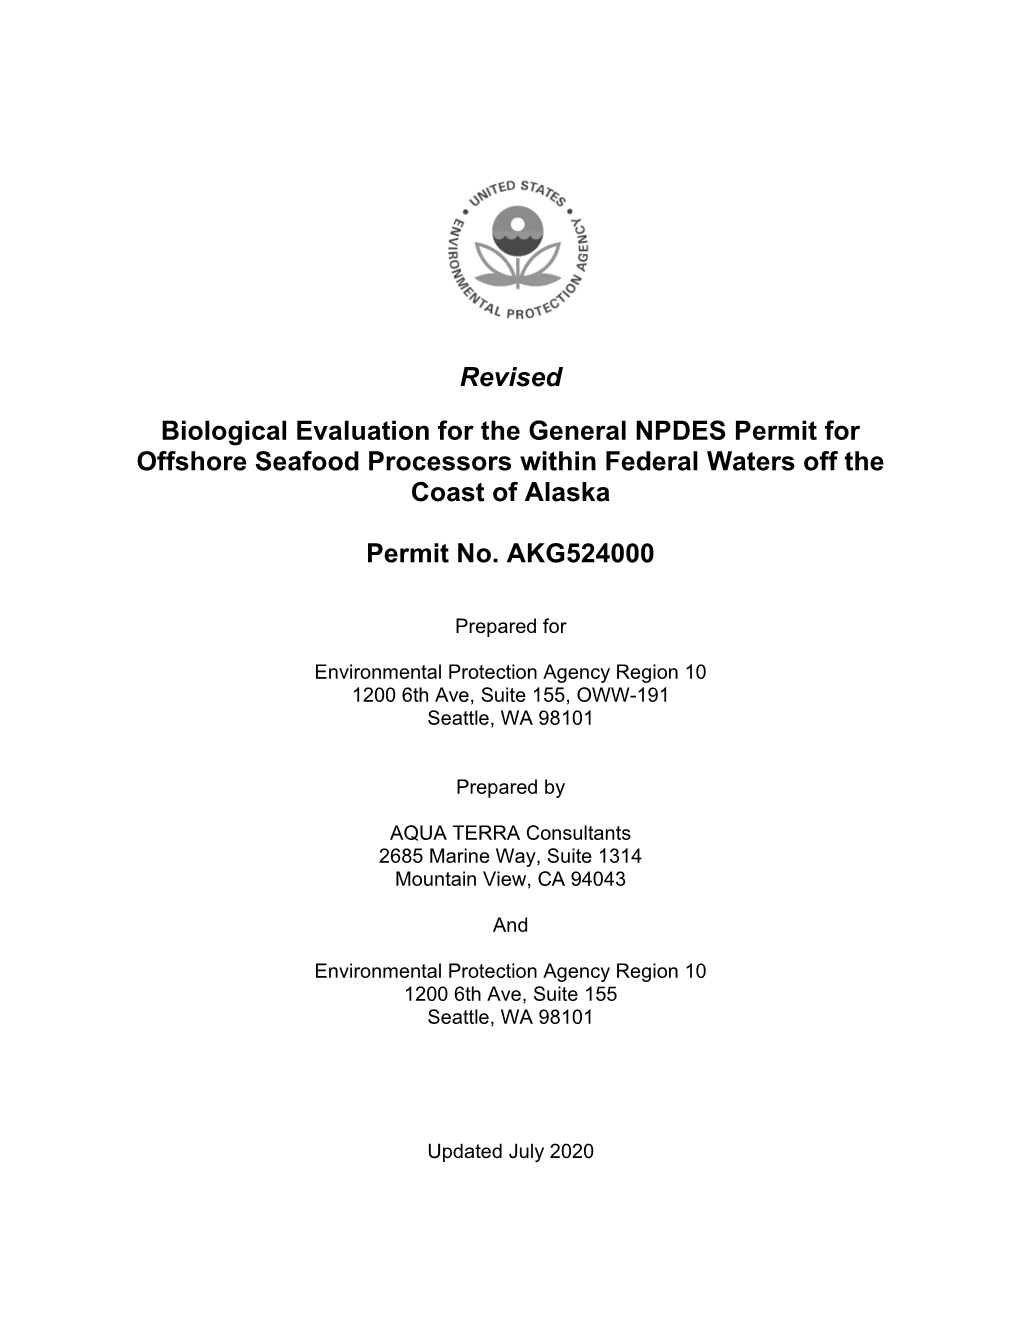 Revised Biological Evaluation for the General NPDES Permit for Offshore